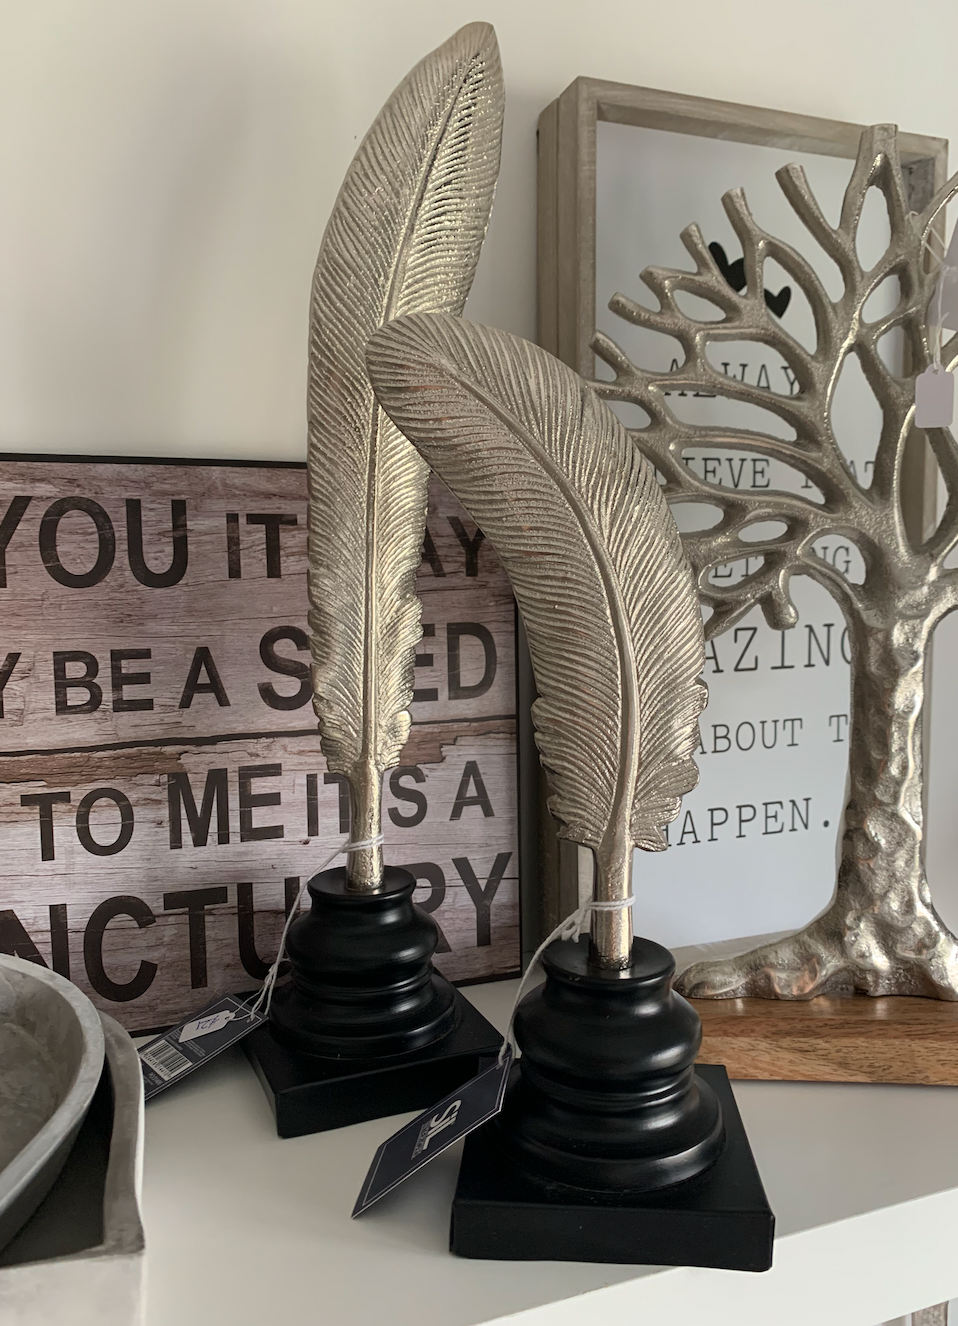 Set Of 2 Silver Feathers On Wooden Bases